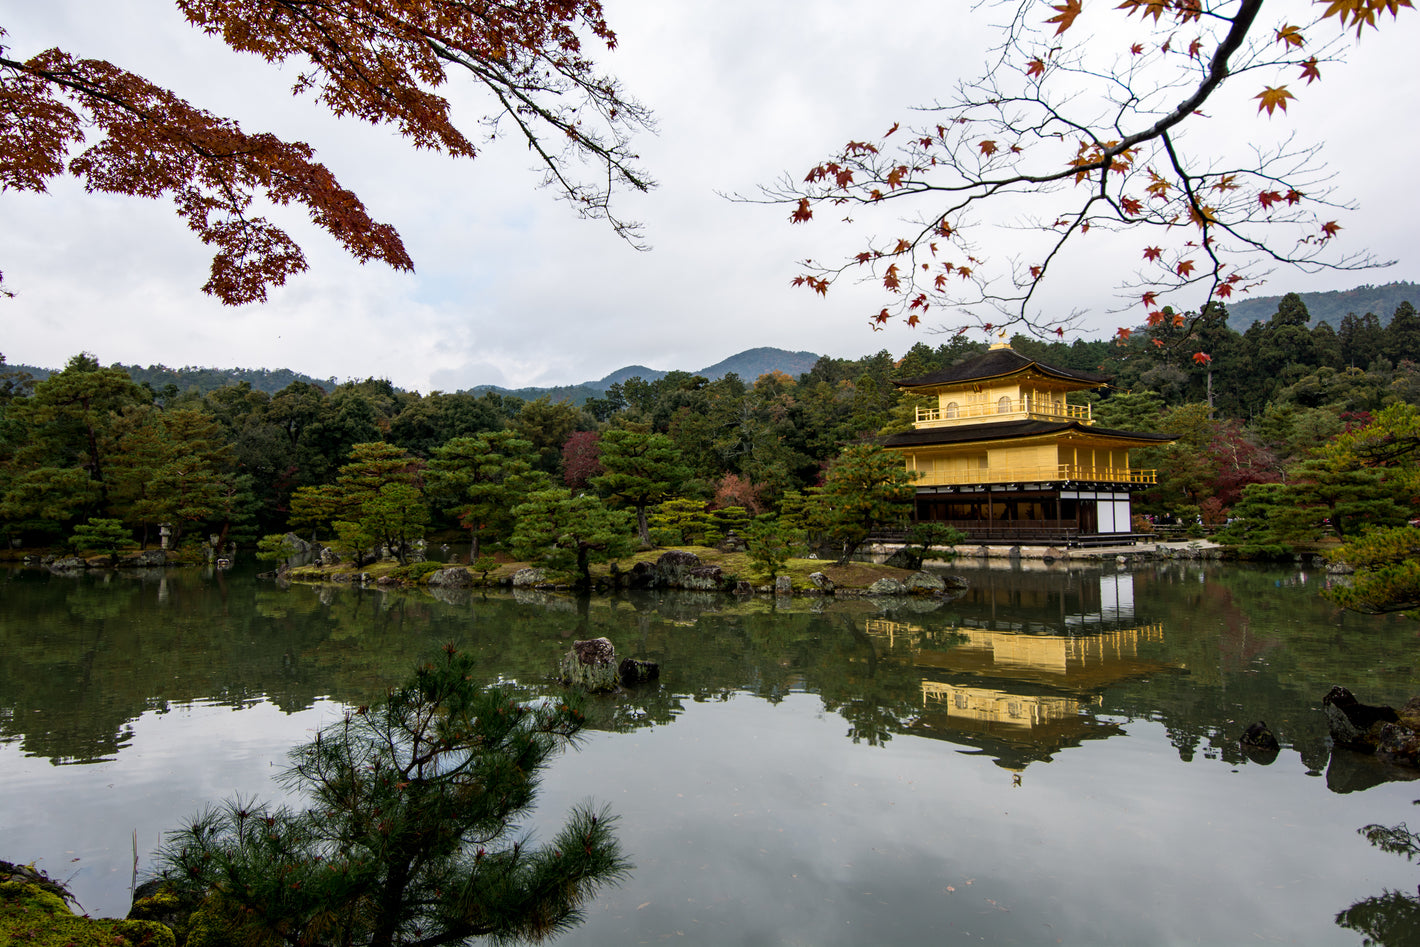 yellow-building-sits-on-a-lake-surrounded-by-trees - KENJI KOI Products